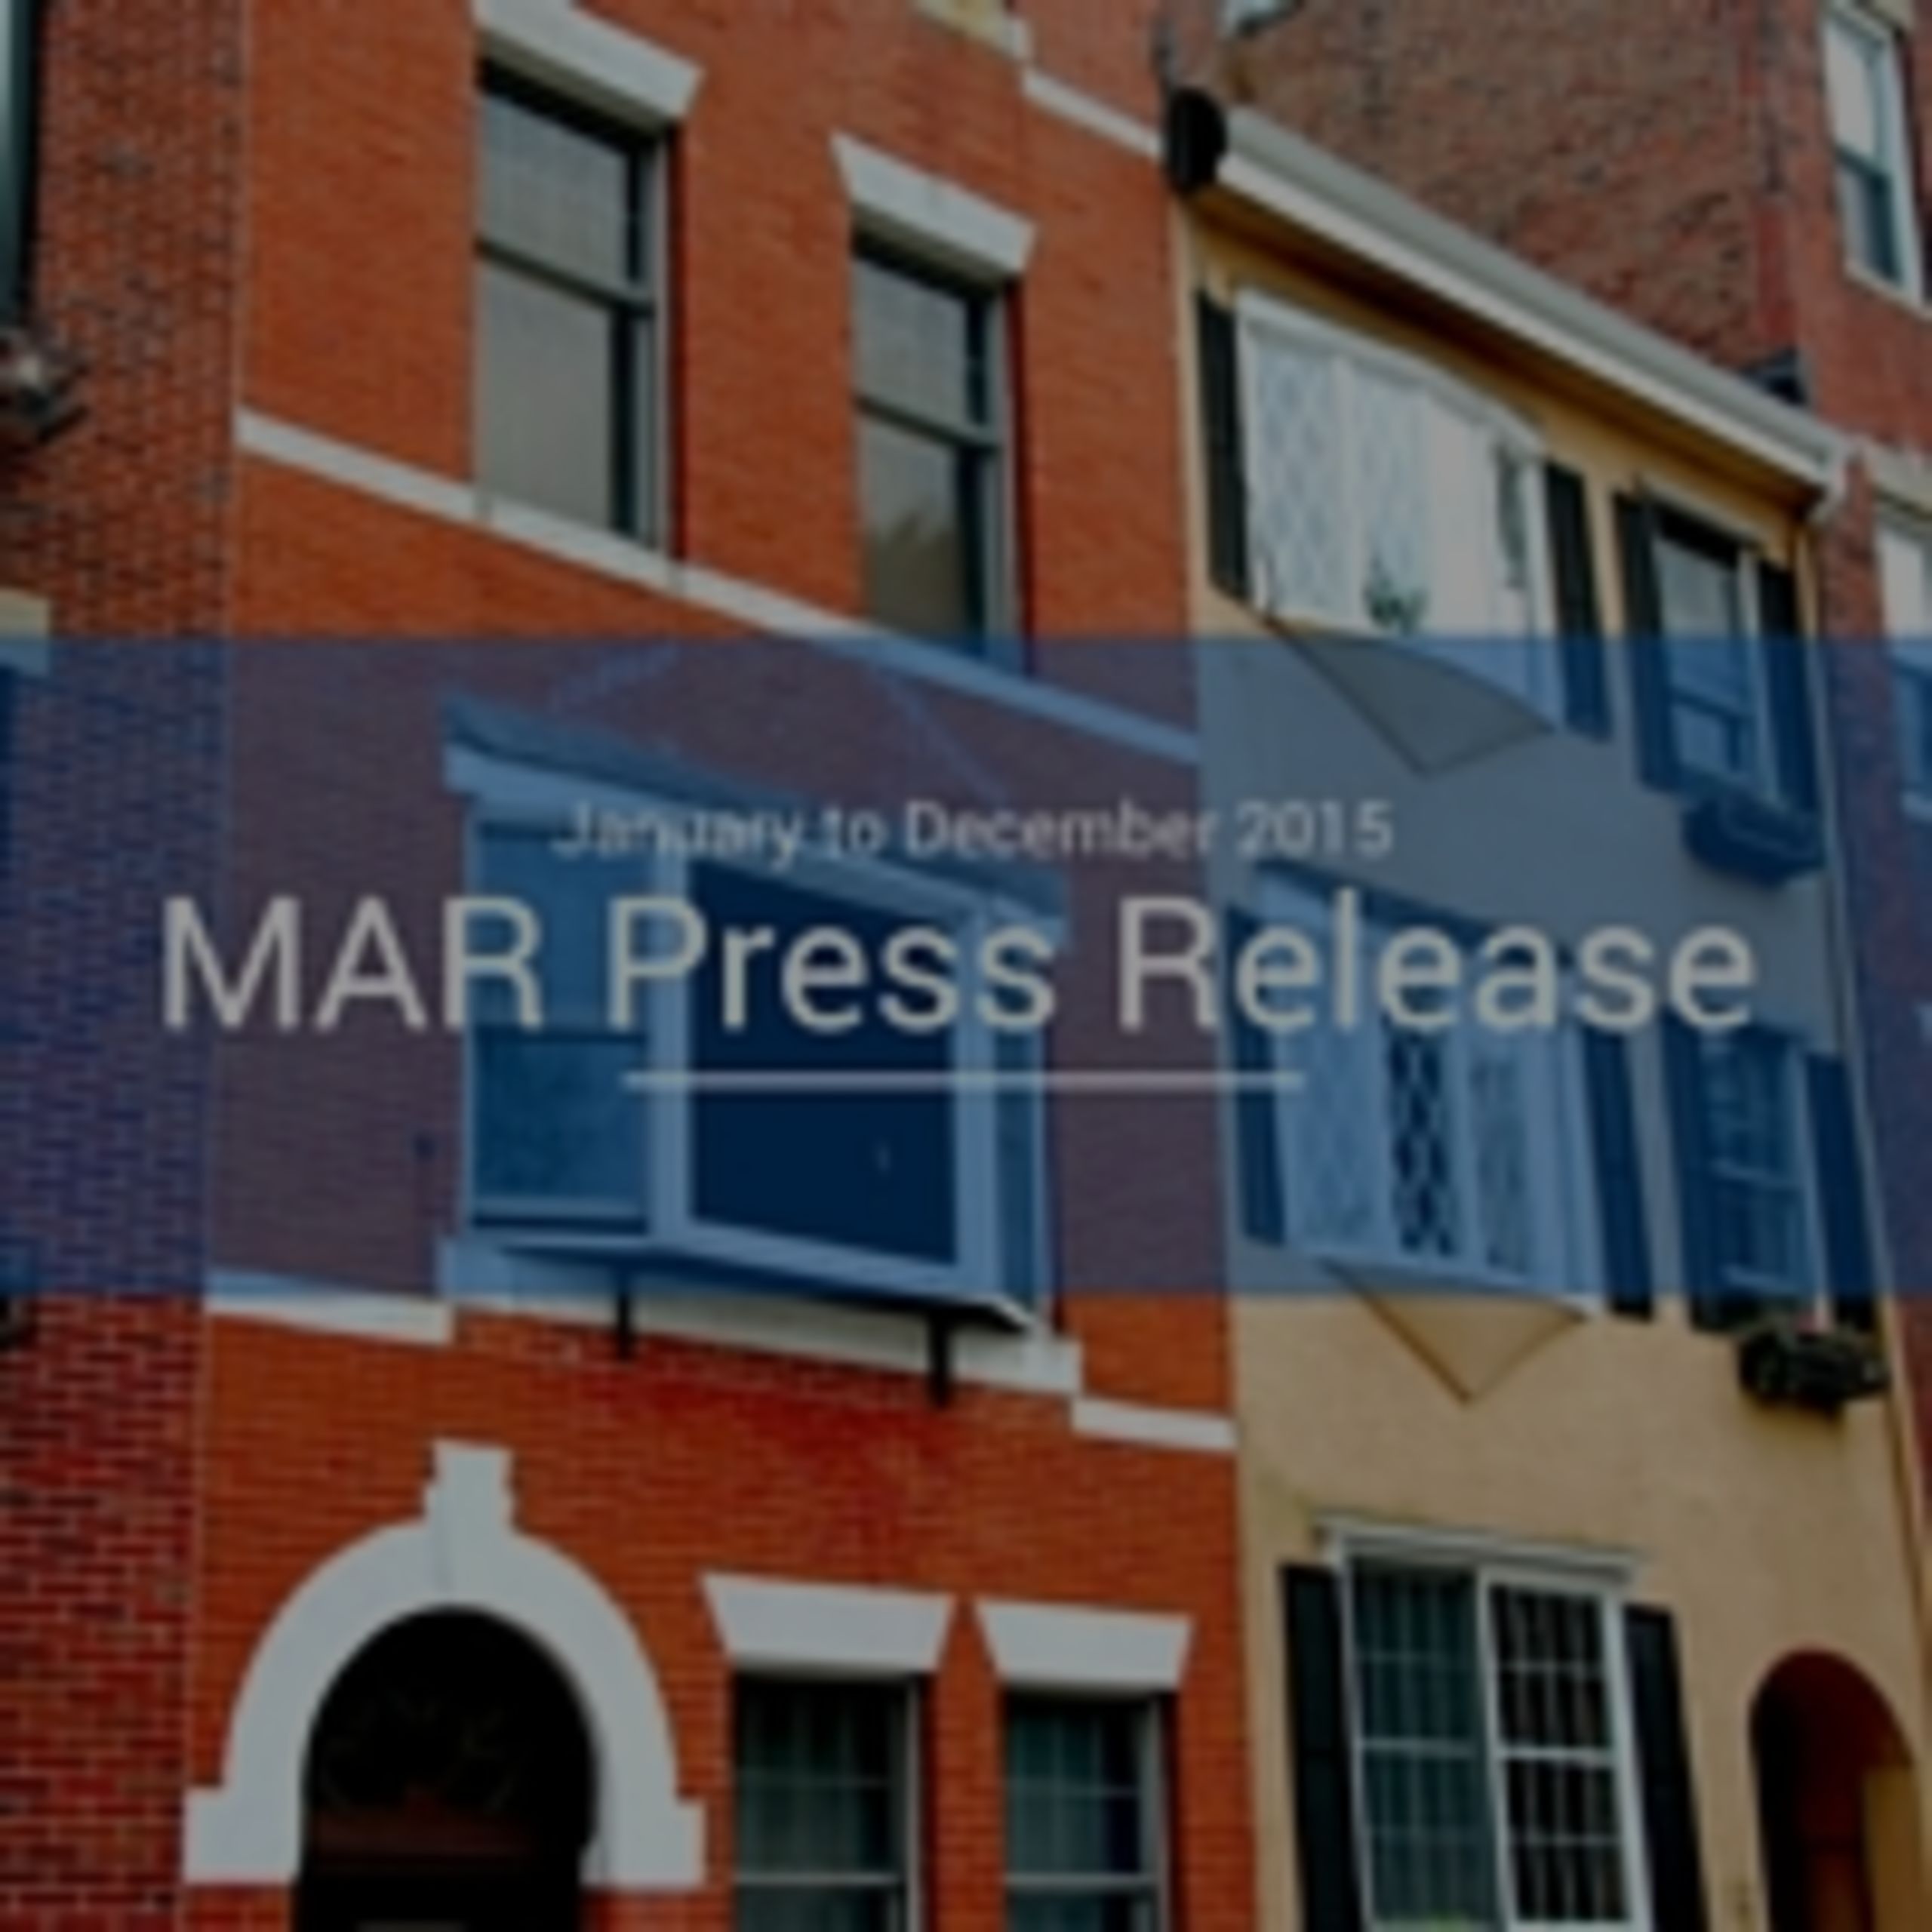 MAR Press Release: Sales and Values Up for 2015